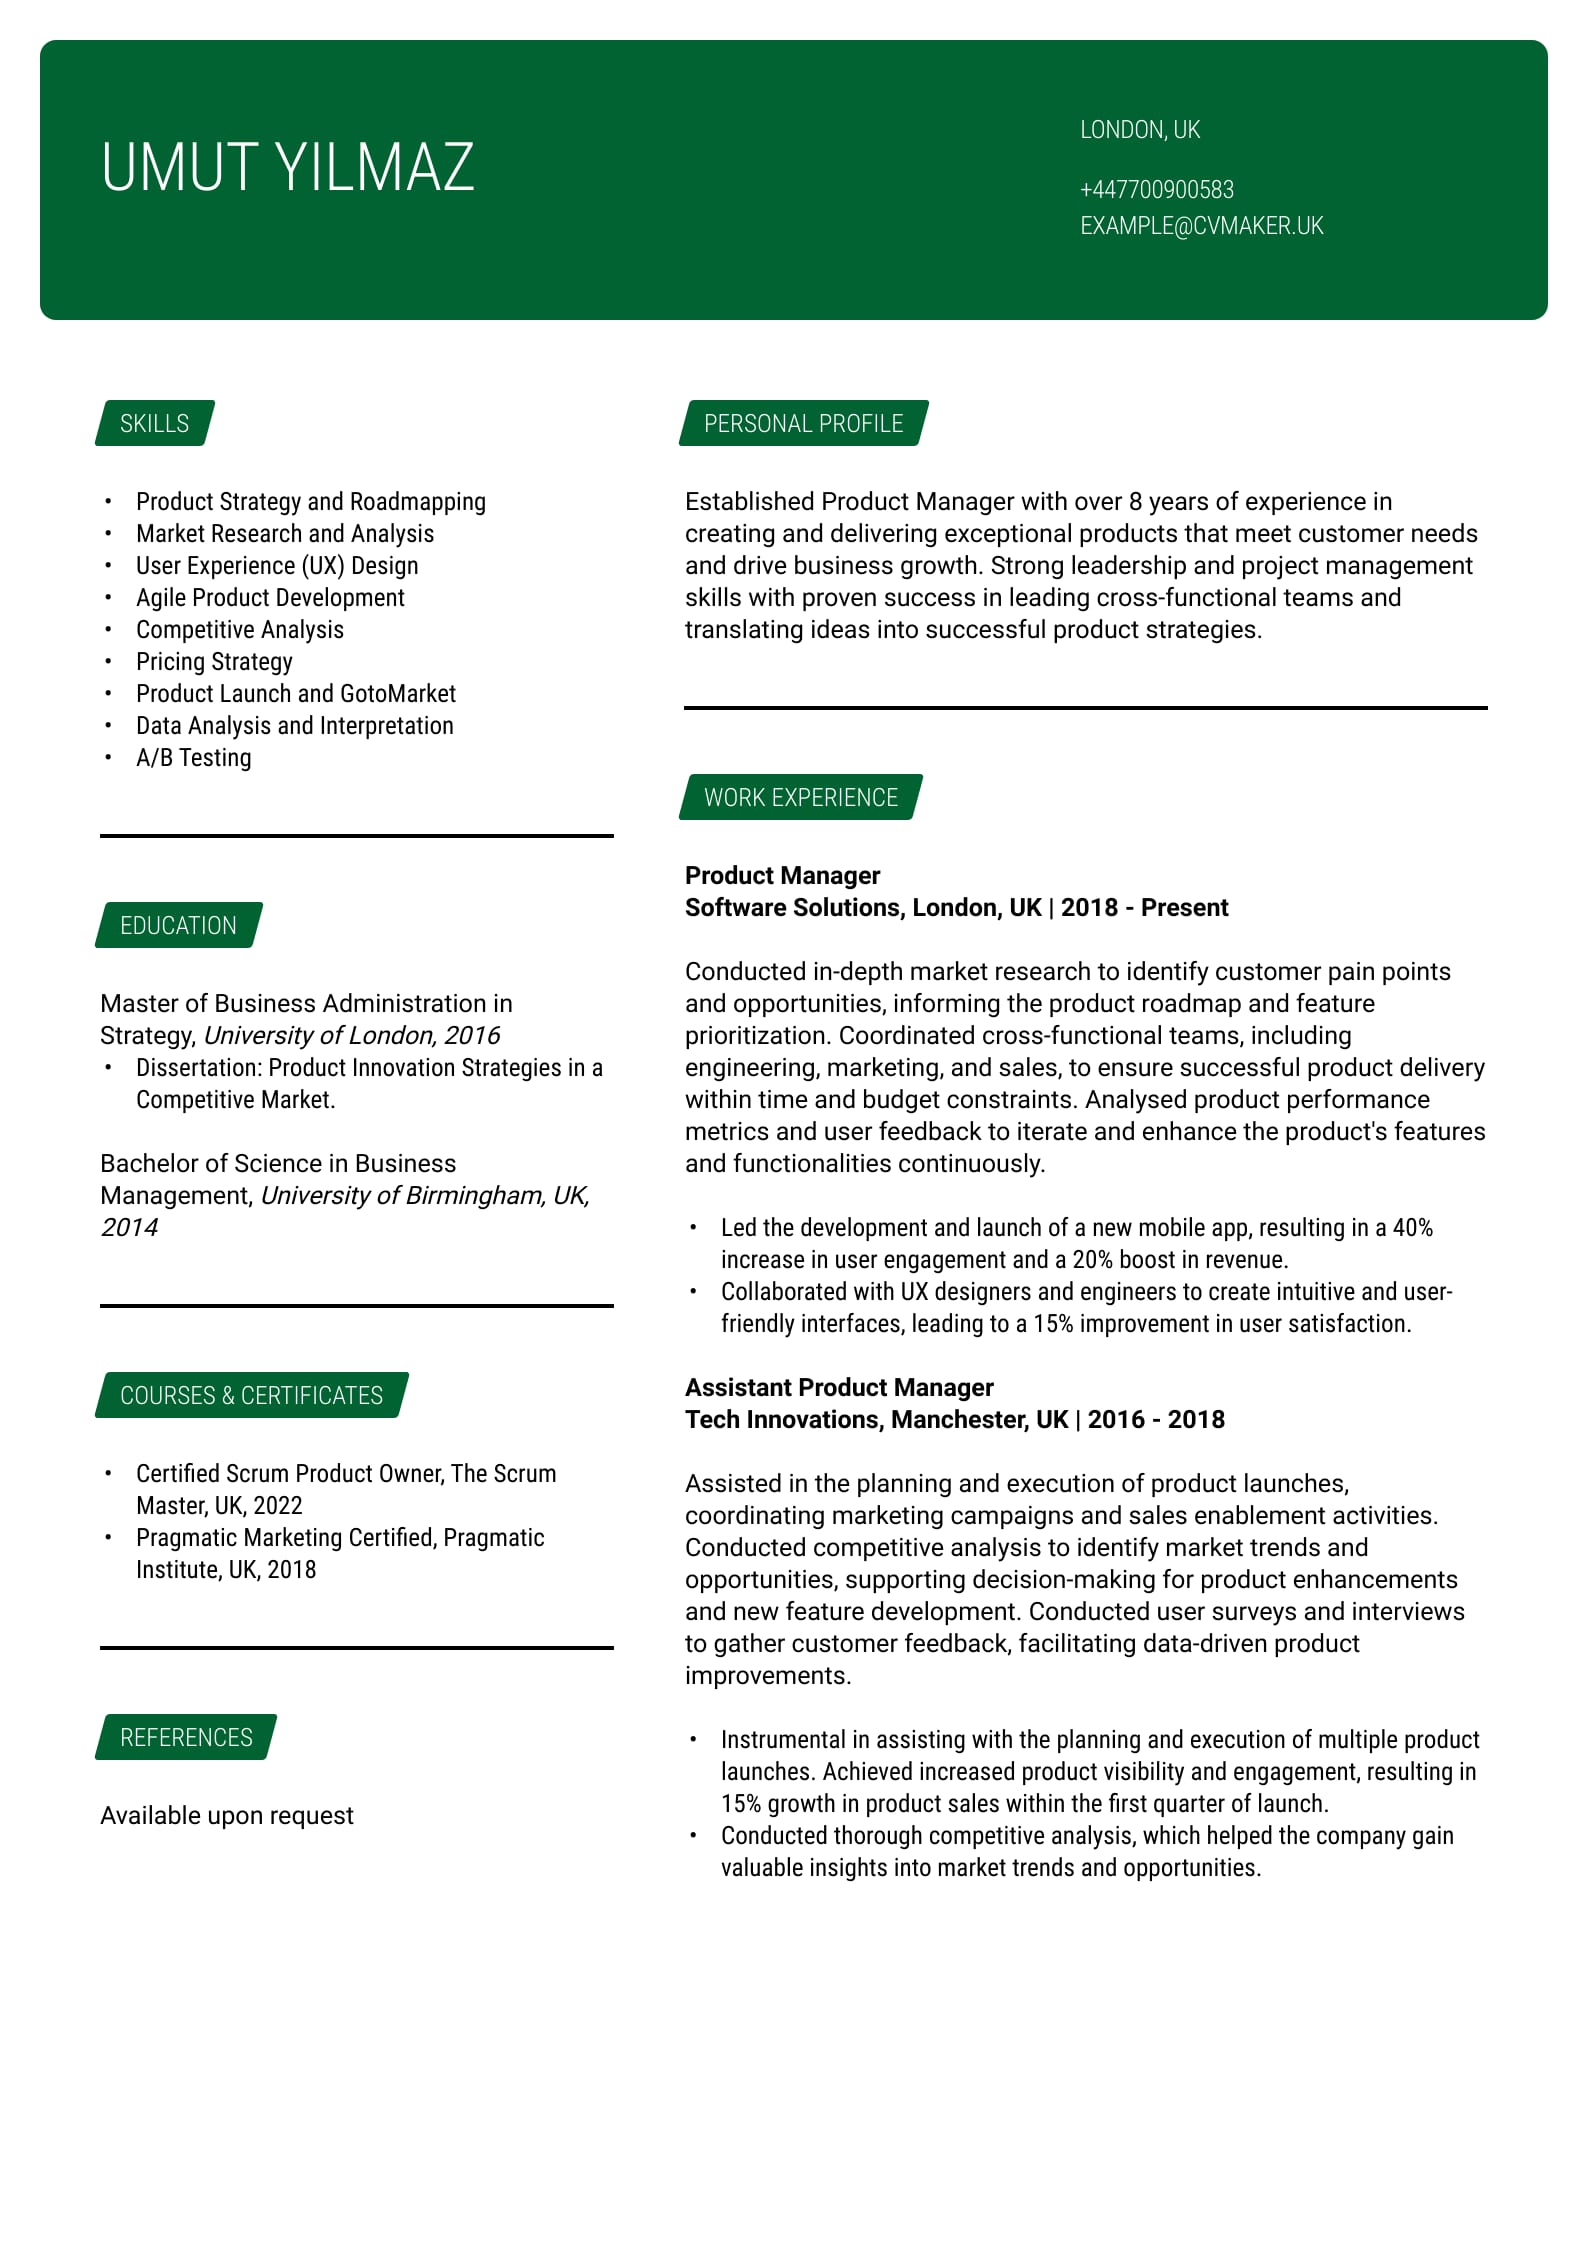 CV example - Product Manager - Erasmus template